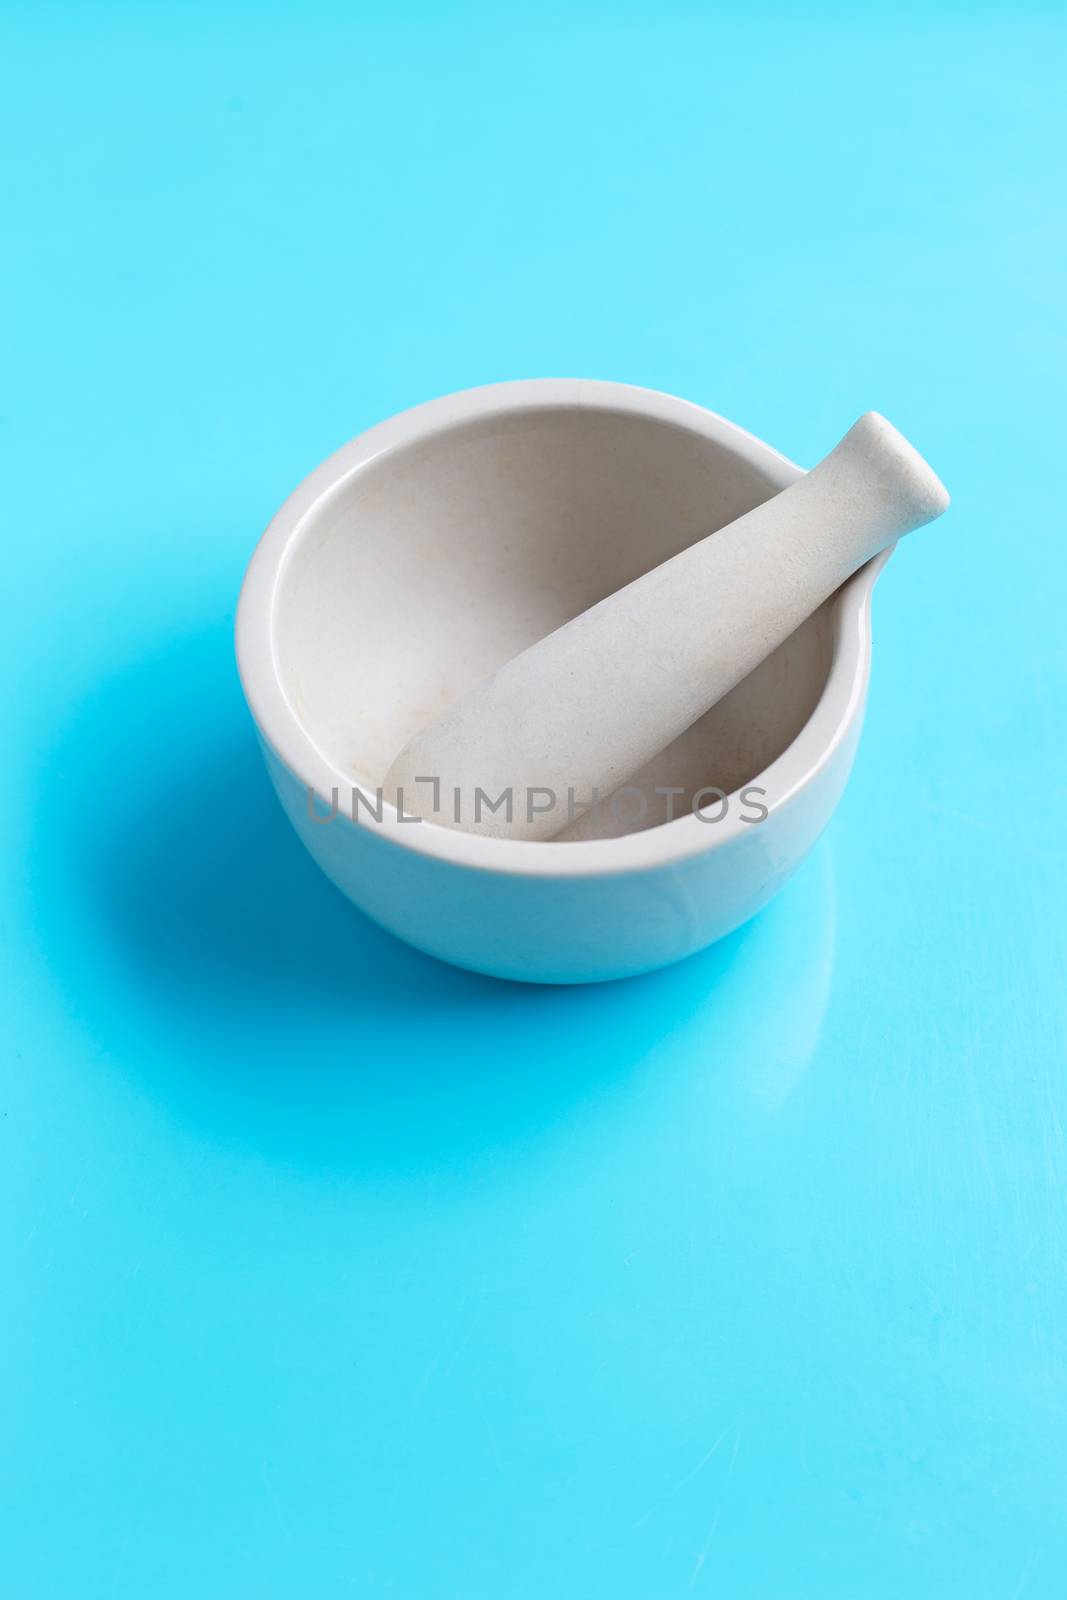 Mortar and pestle on blue background.  by Bowonpat